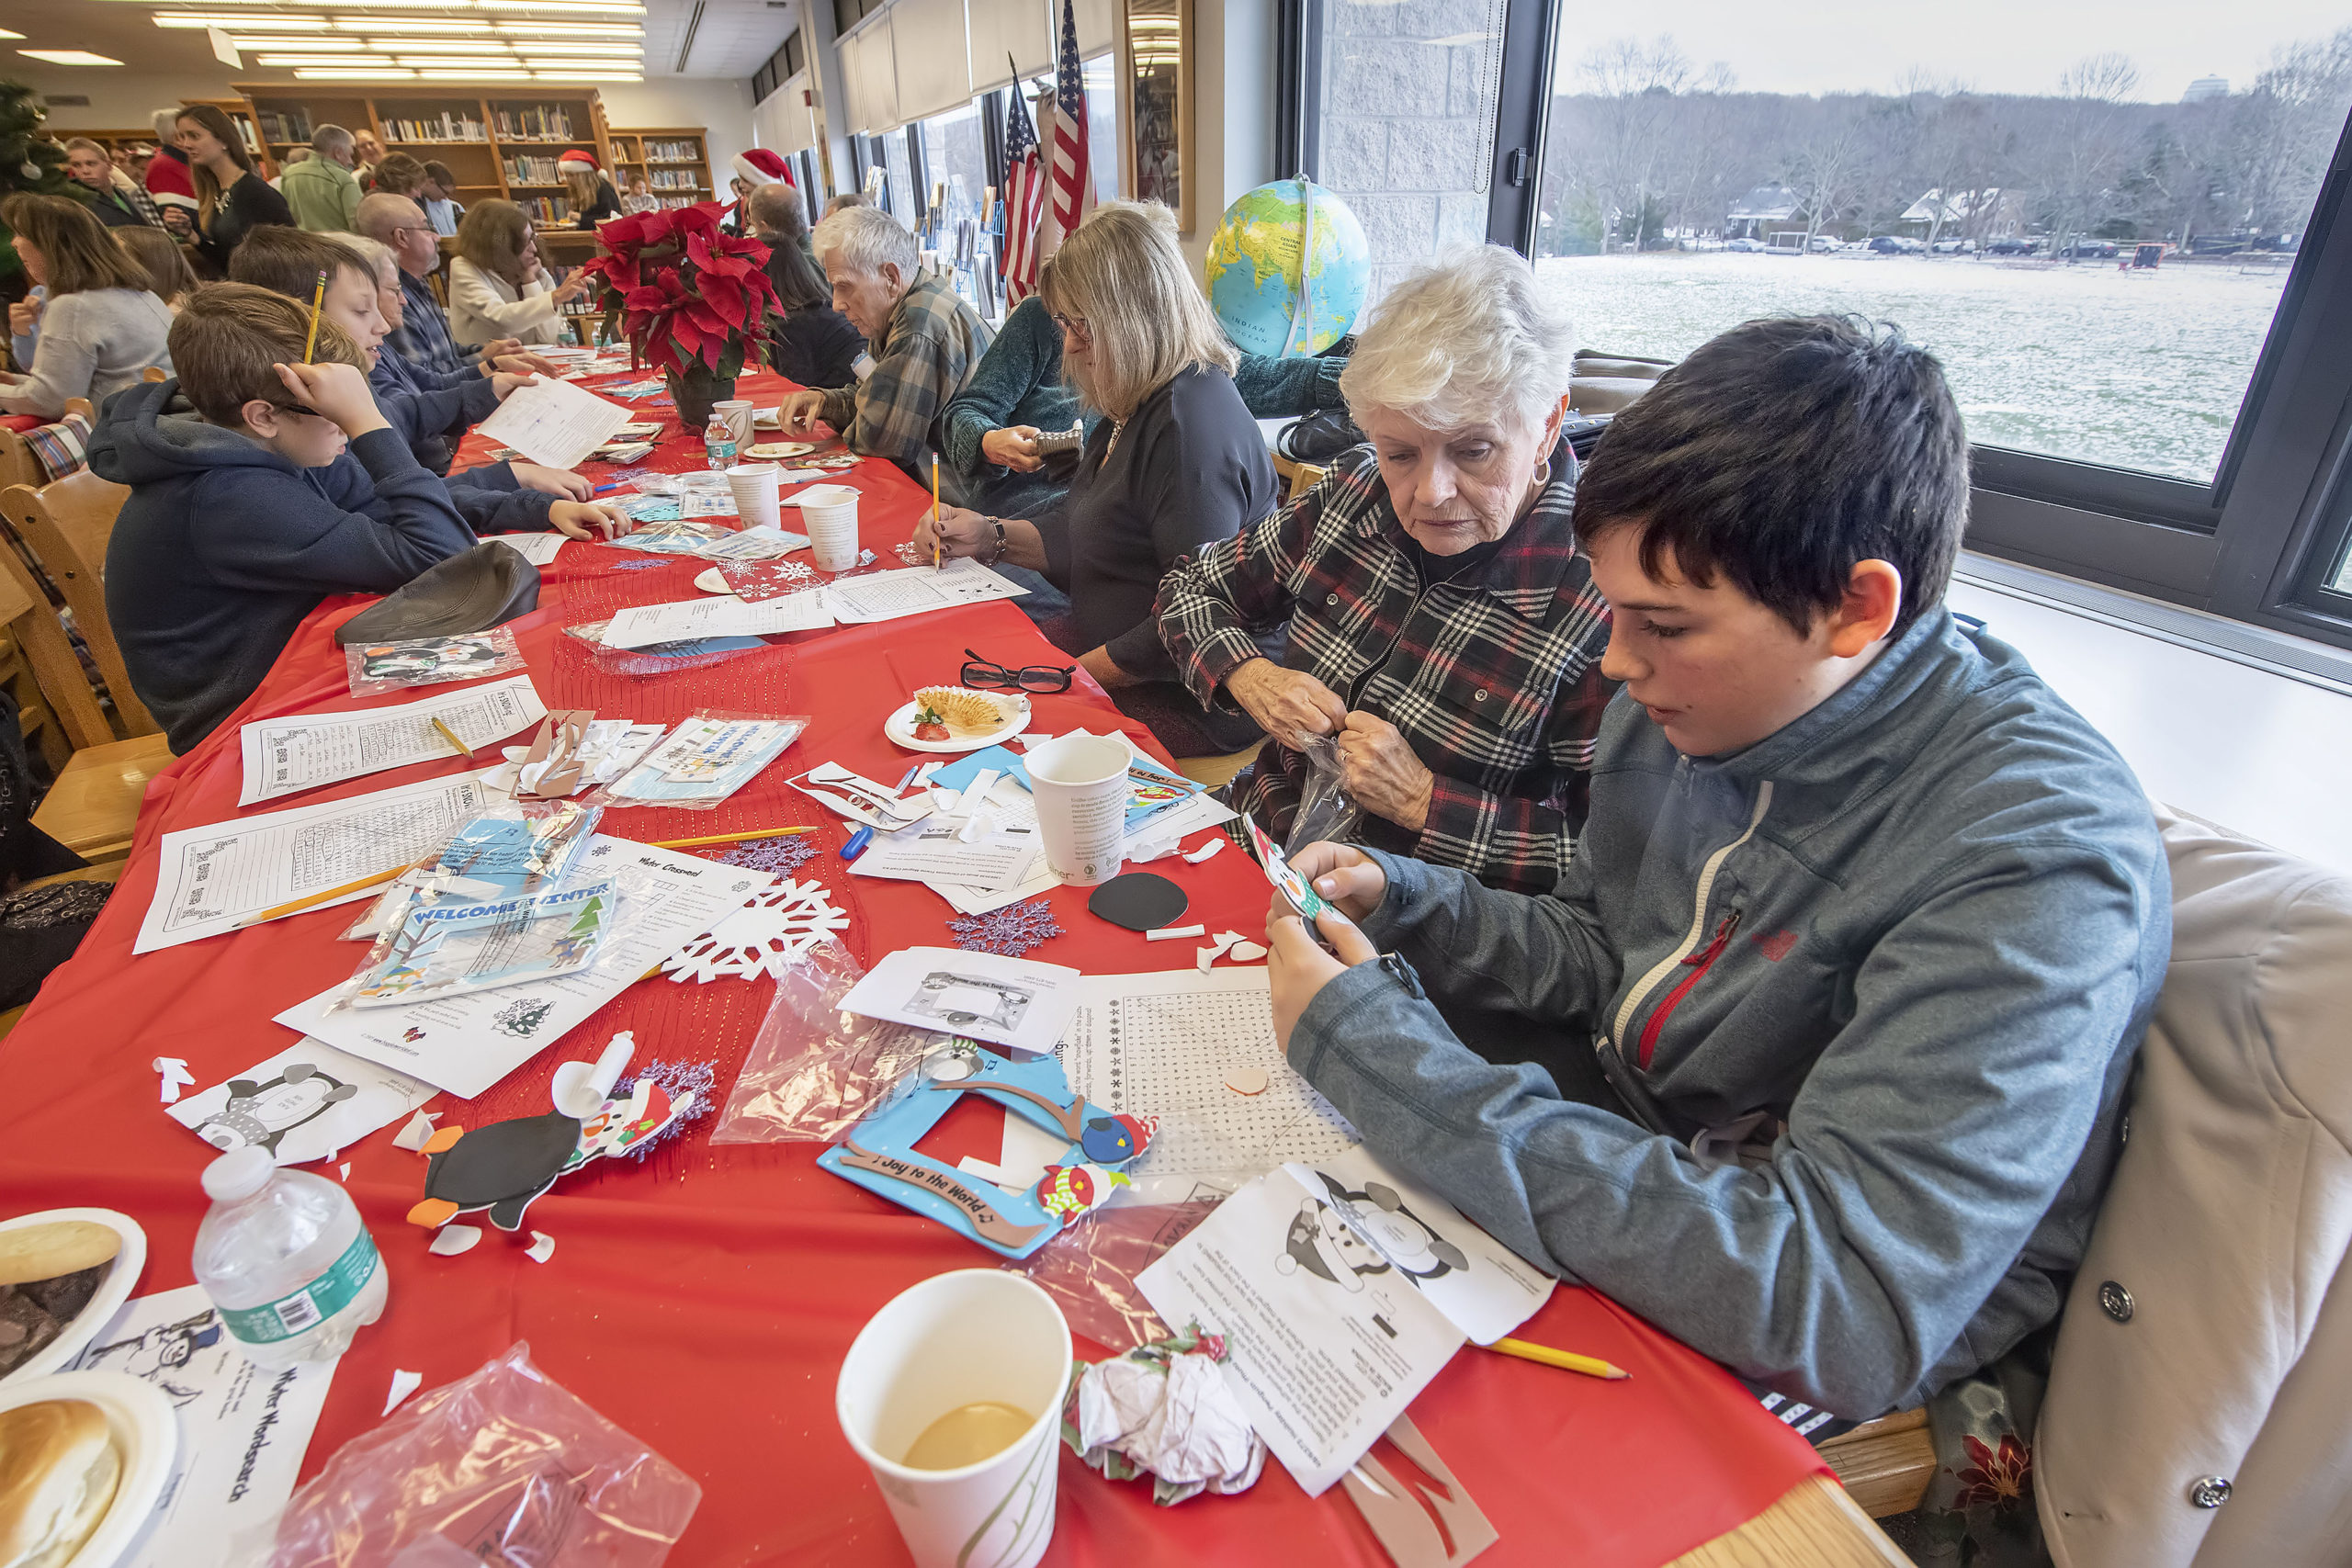 Patrick Caufield works on making a picture frame with his grandmother Gerri during the Pierson Middle School Snowflake Tea that was held in the Pierson High School library on Friday, December 13.   MICHAEL HELLER